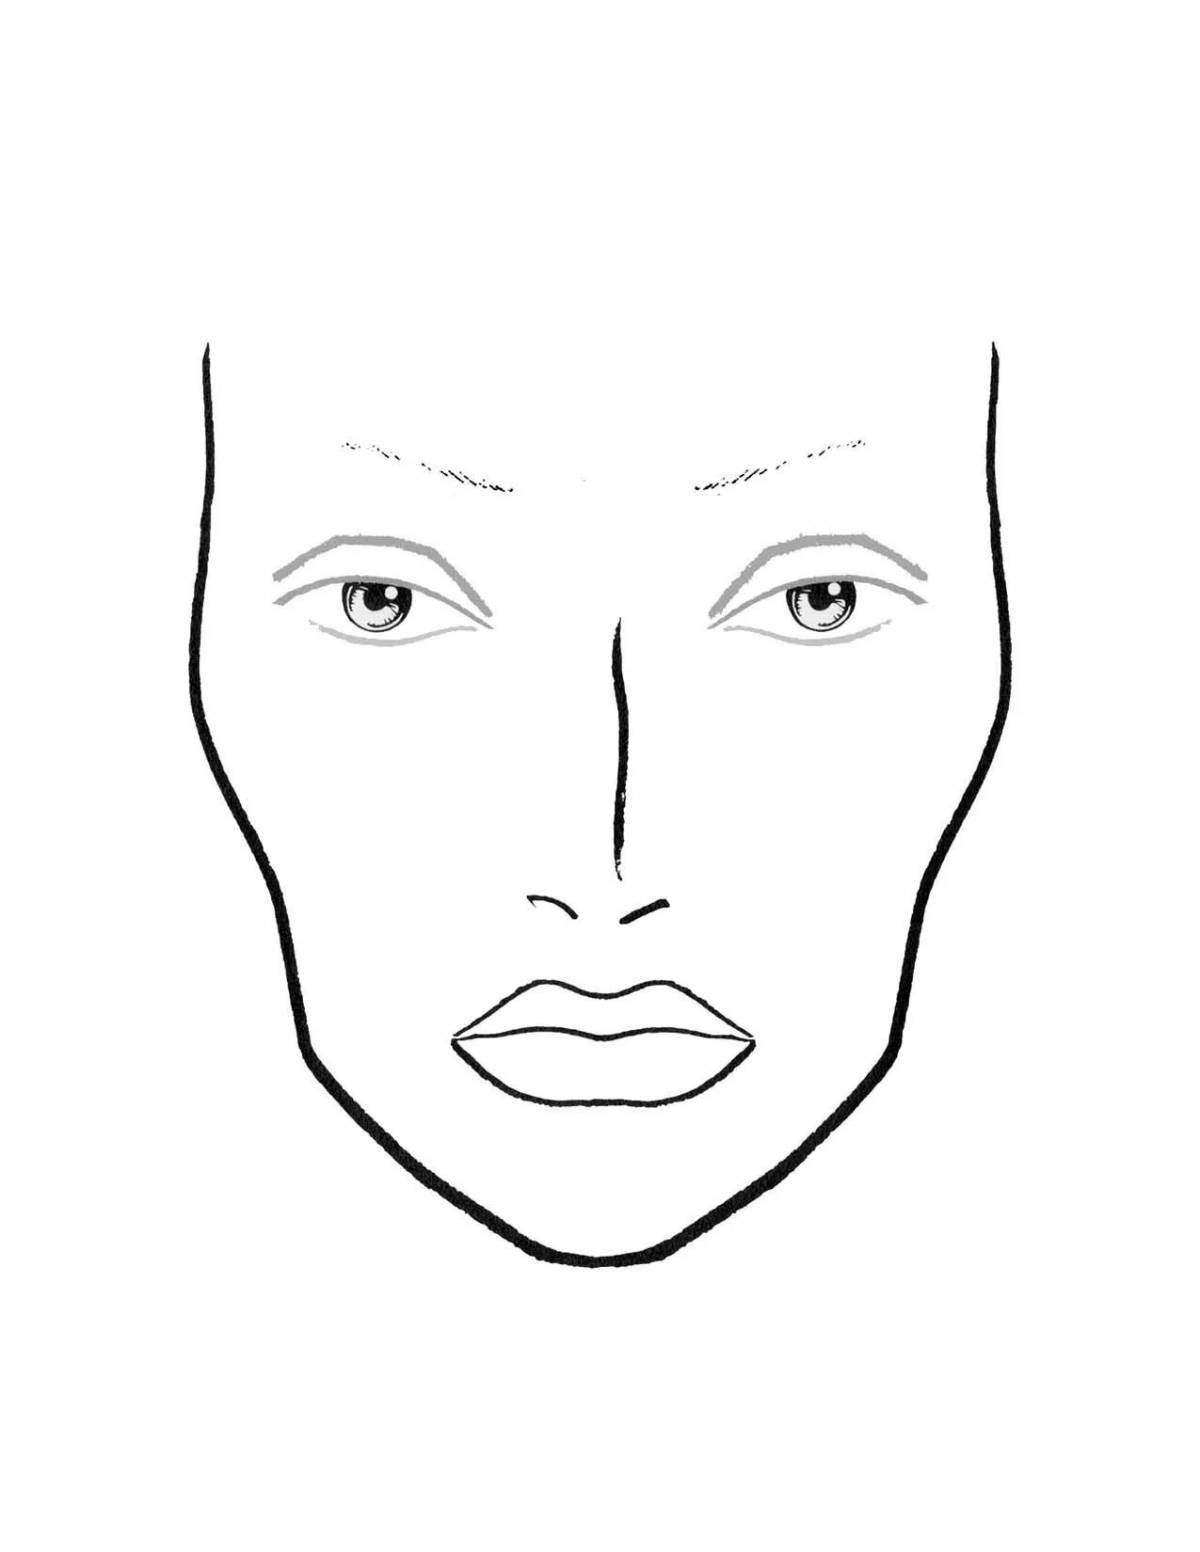 Charming face coloring page